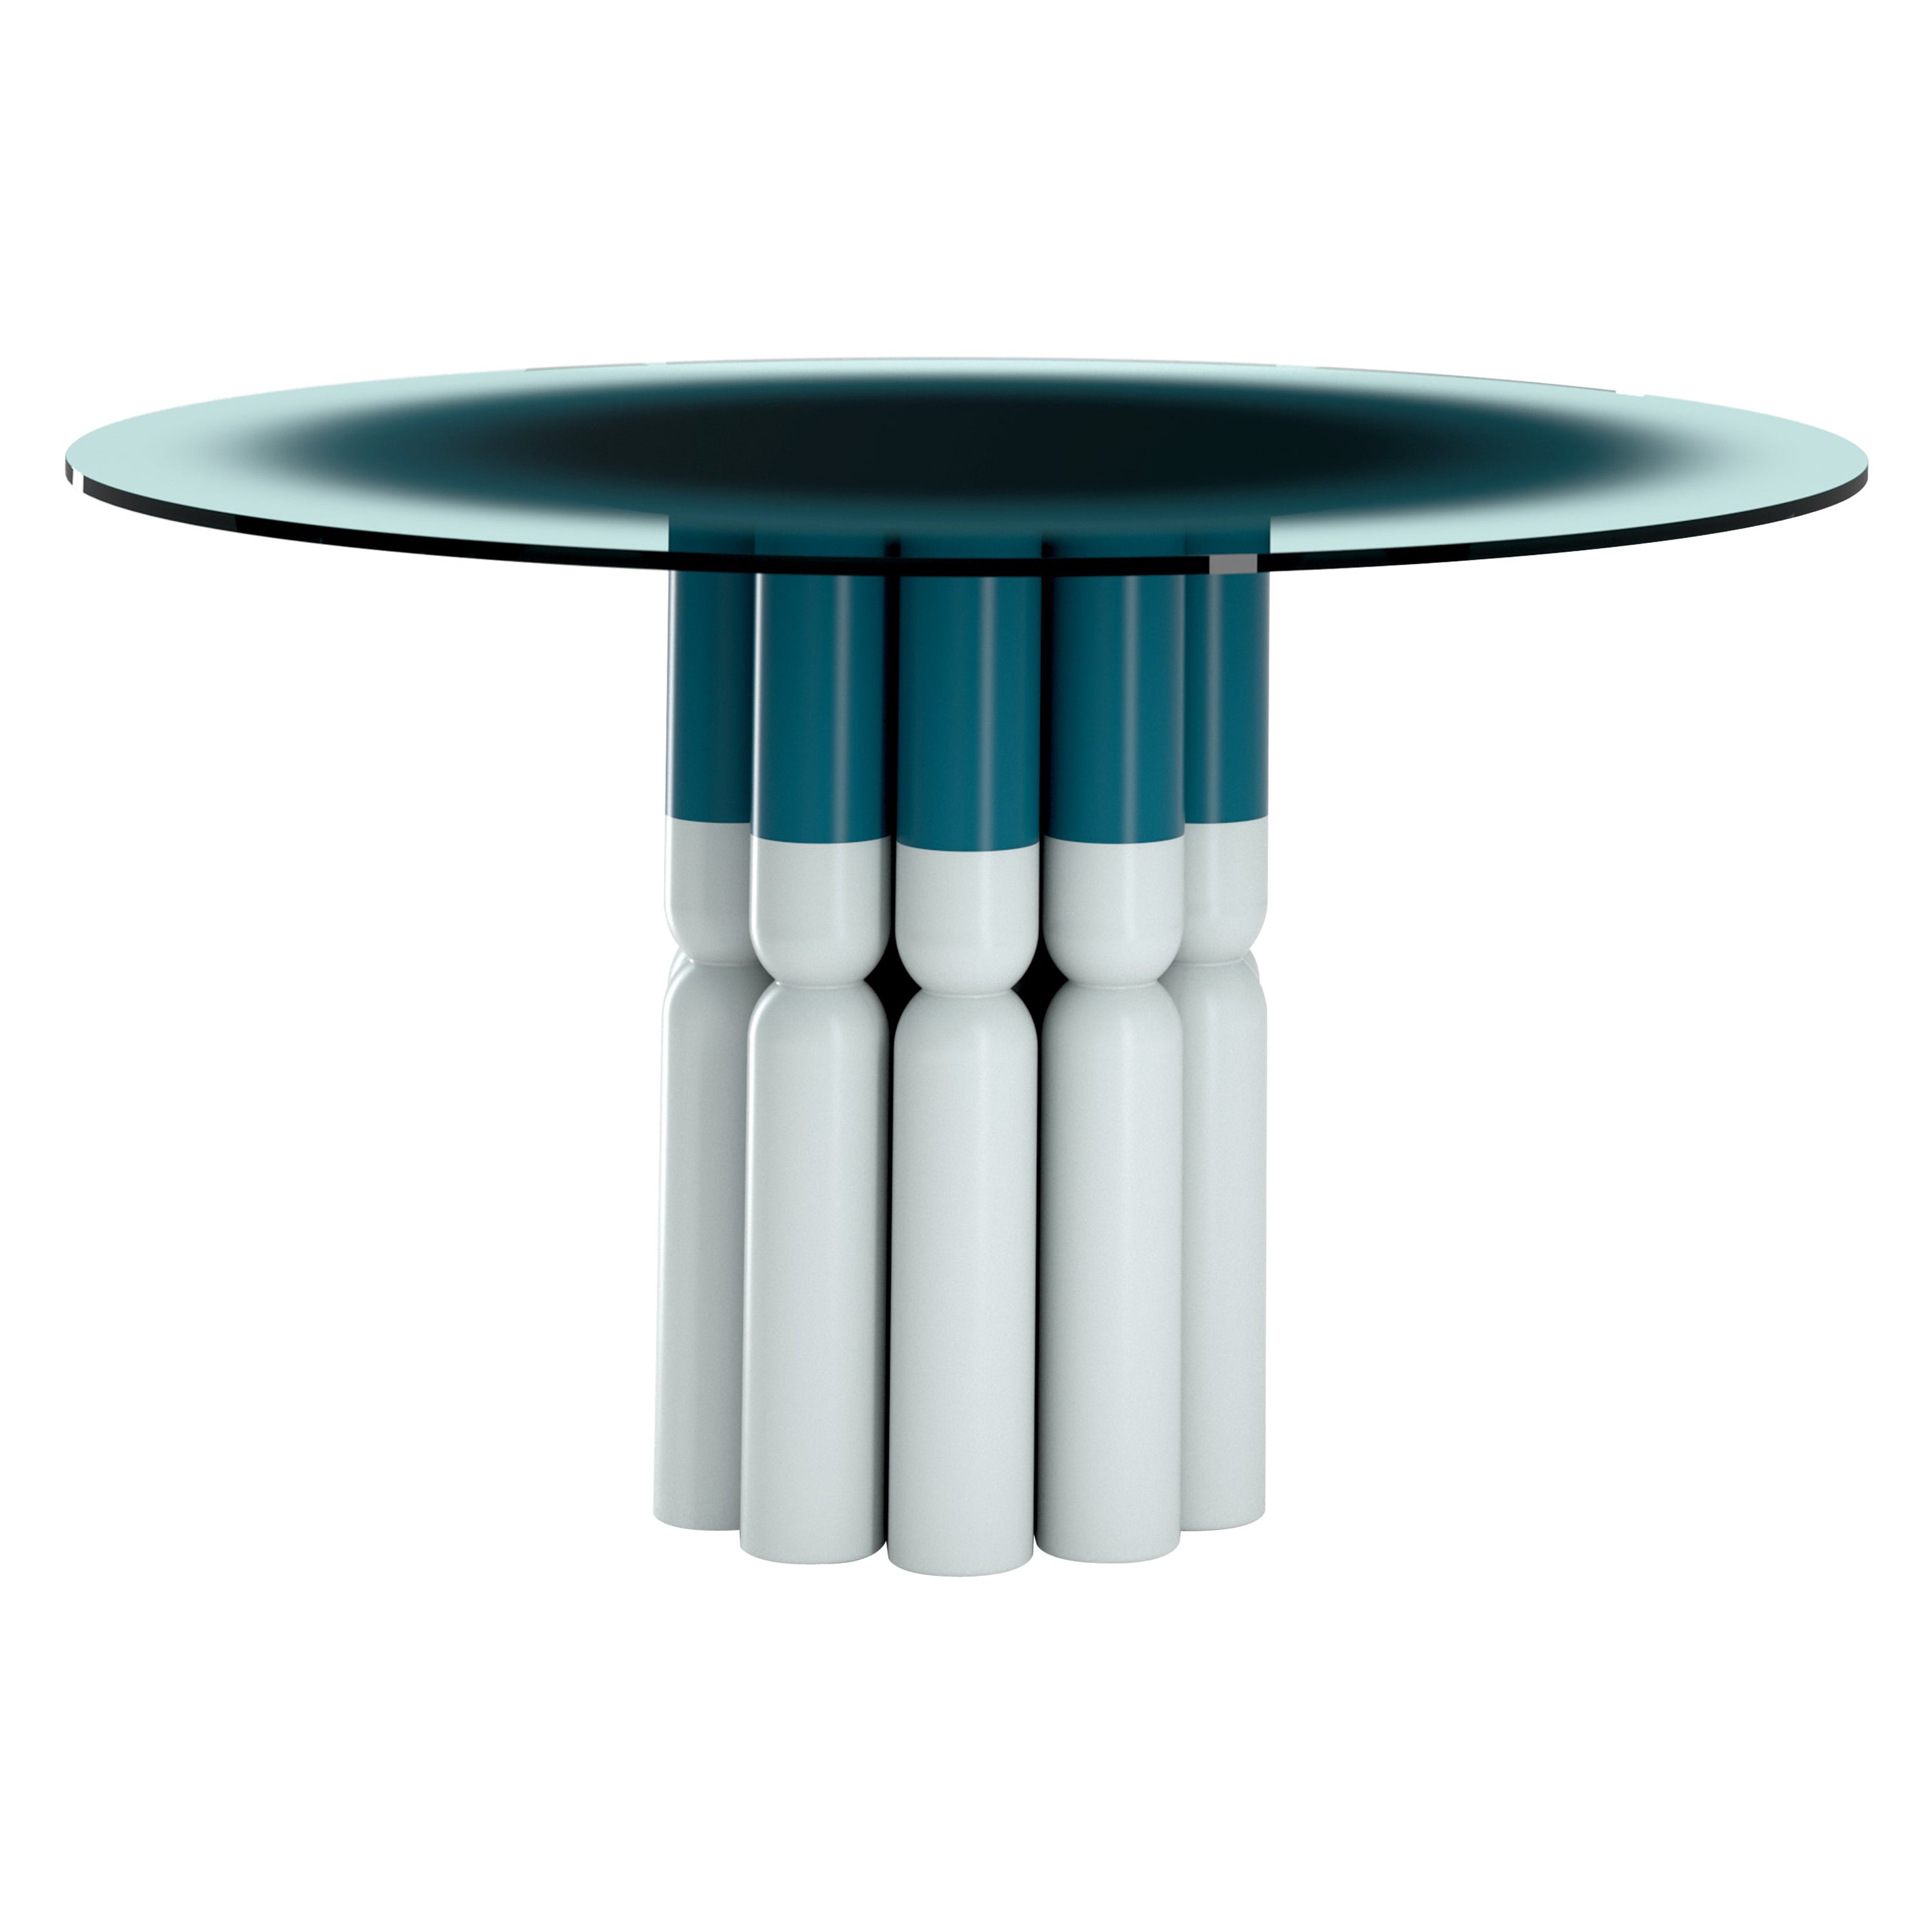 Happy Meal, Dining Table, Glass, Wood, Limited, Contemporary, Hand Made, Denmark